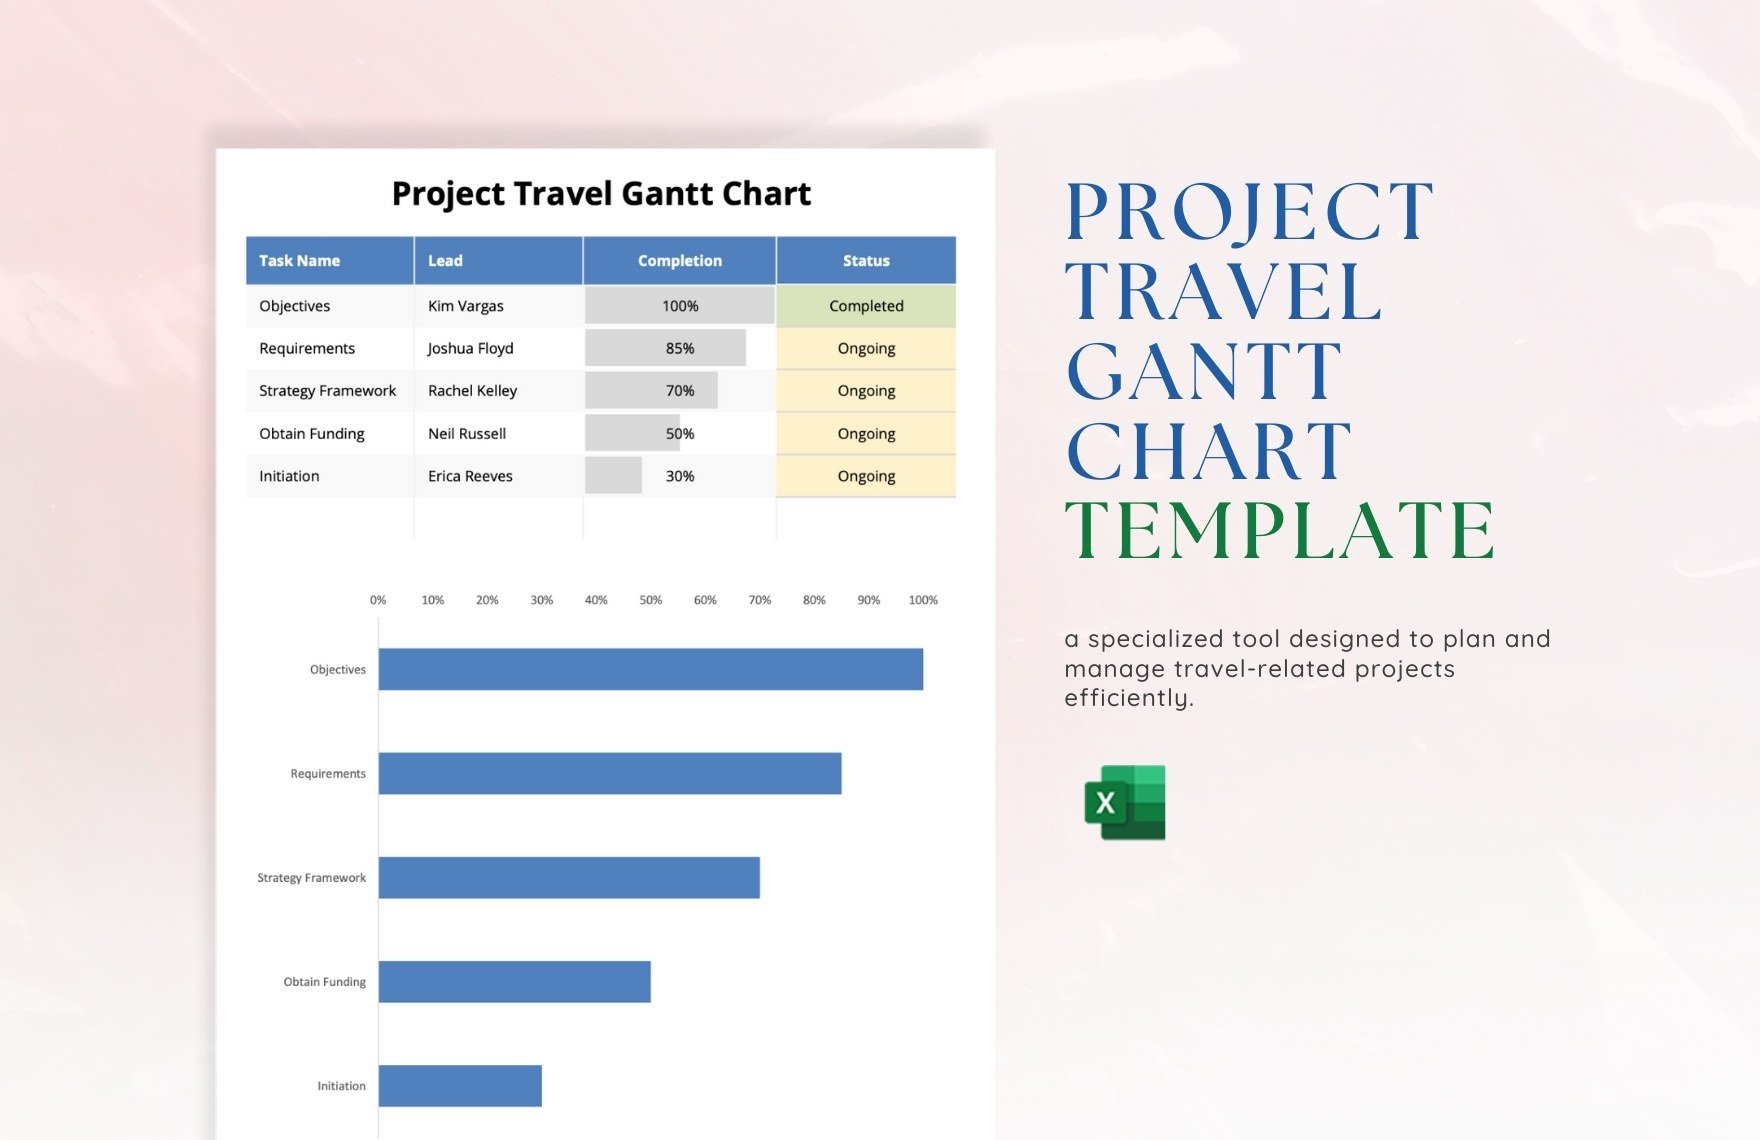 Project Travel Gantt Chart Template in Excel